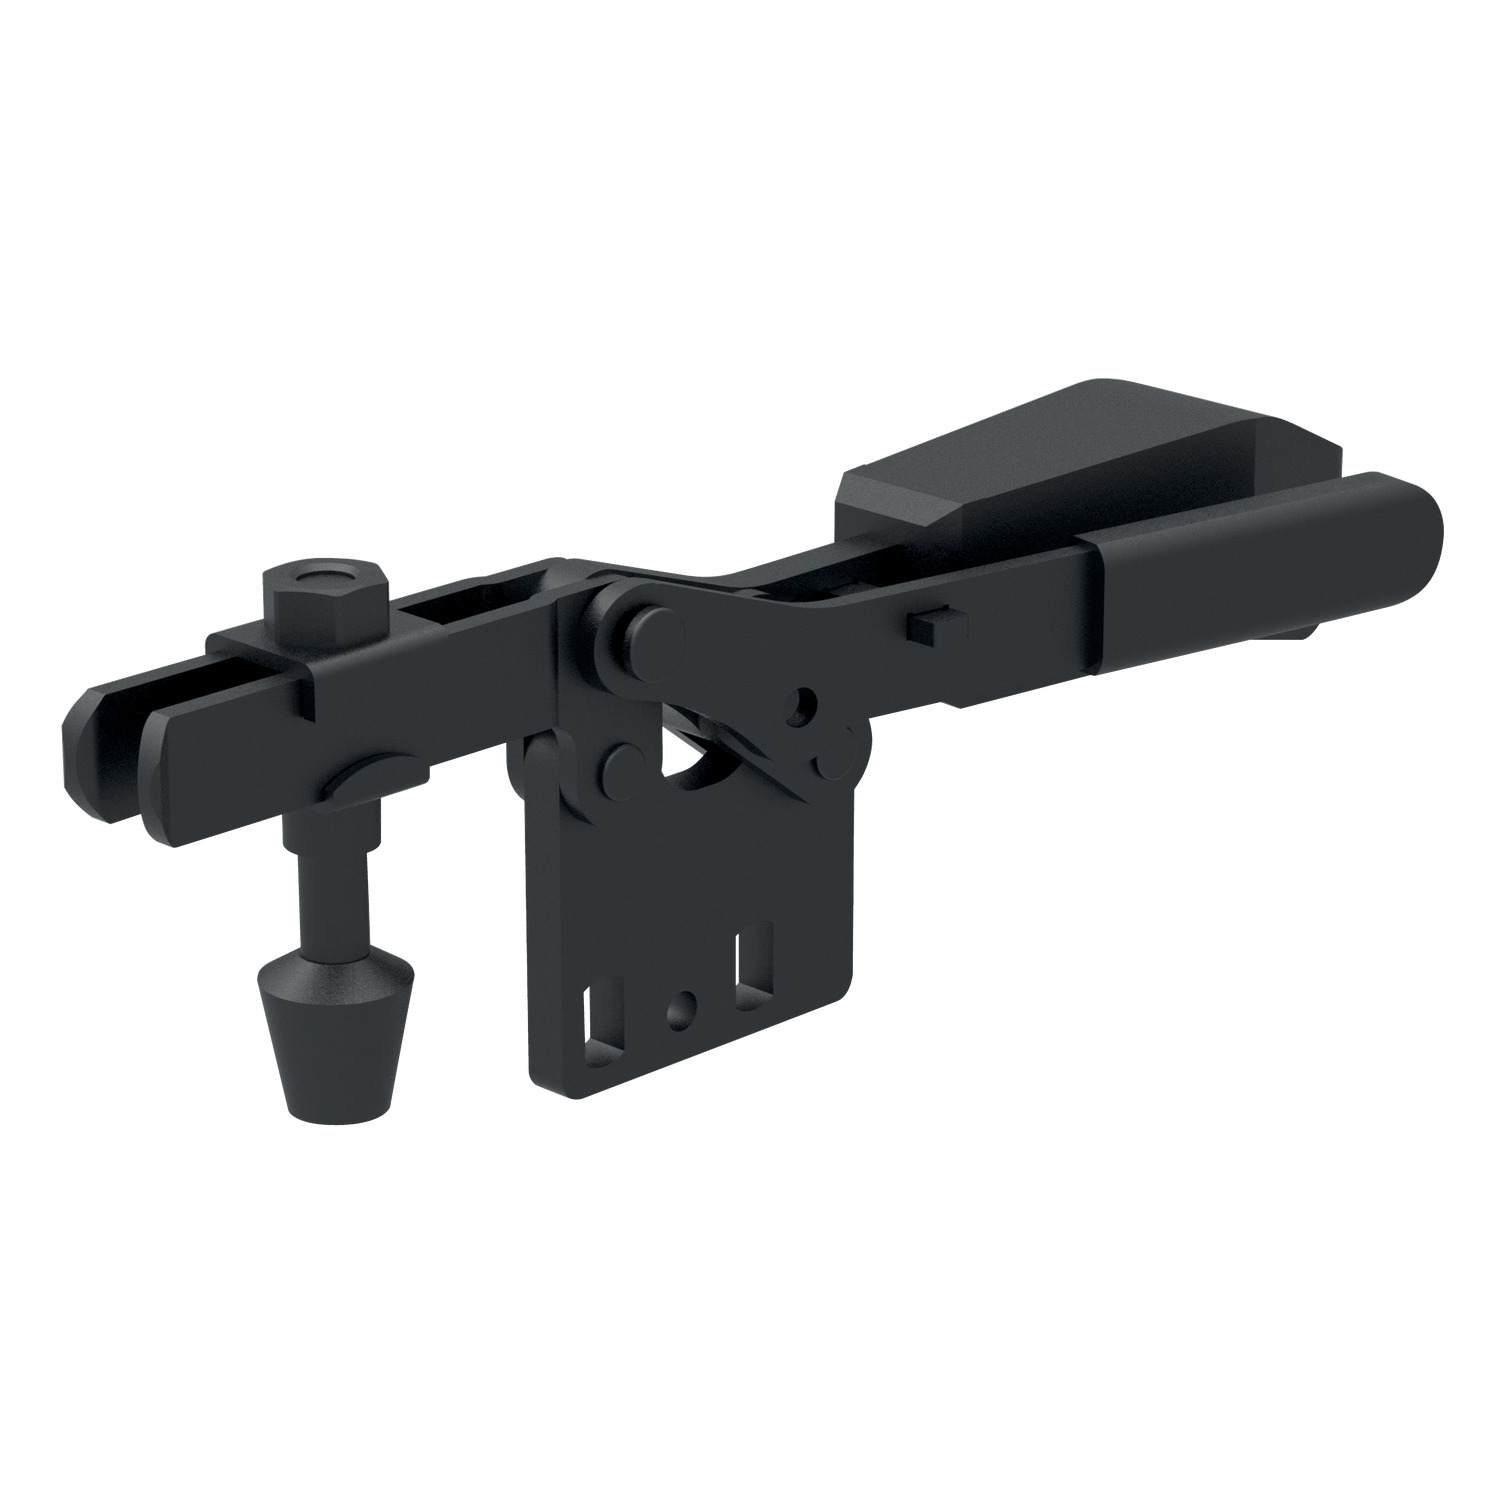 41060.2 Horizontal Acting Toggle Clamps